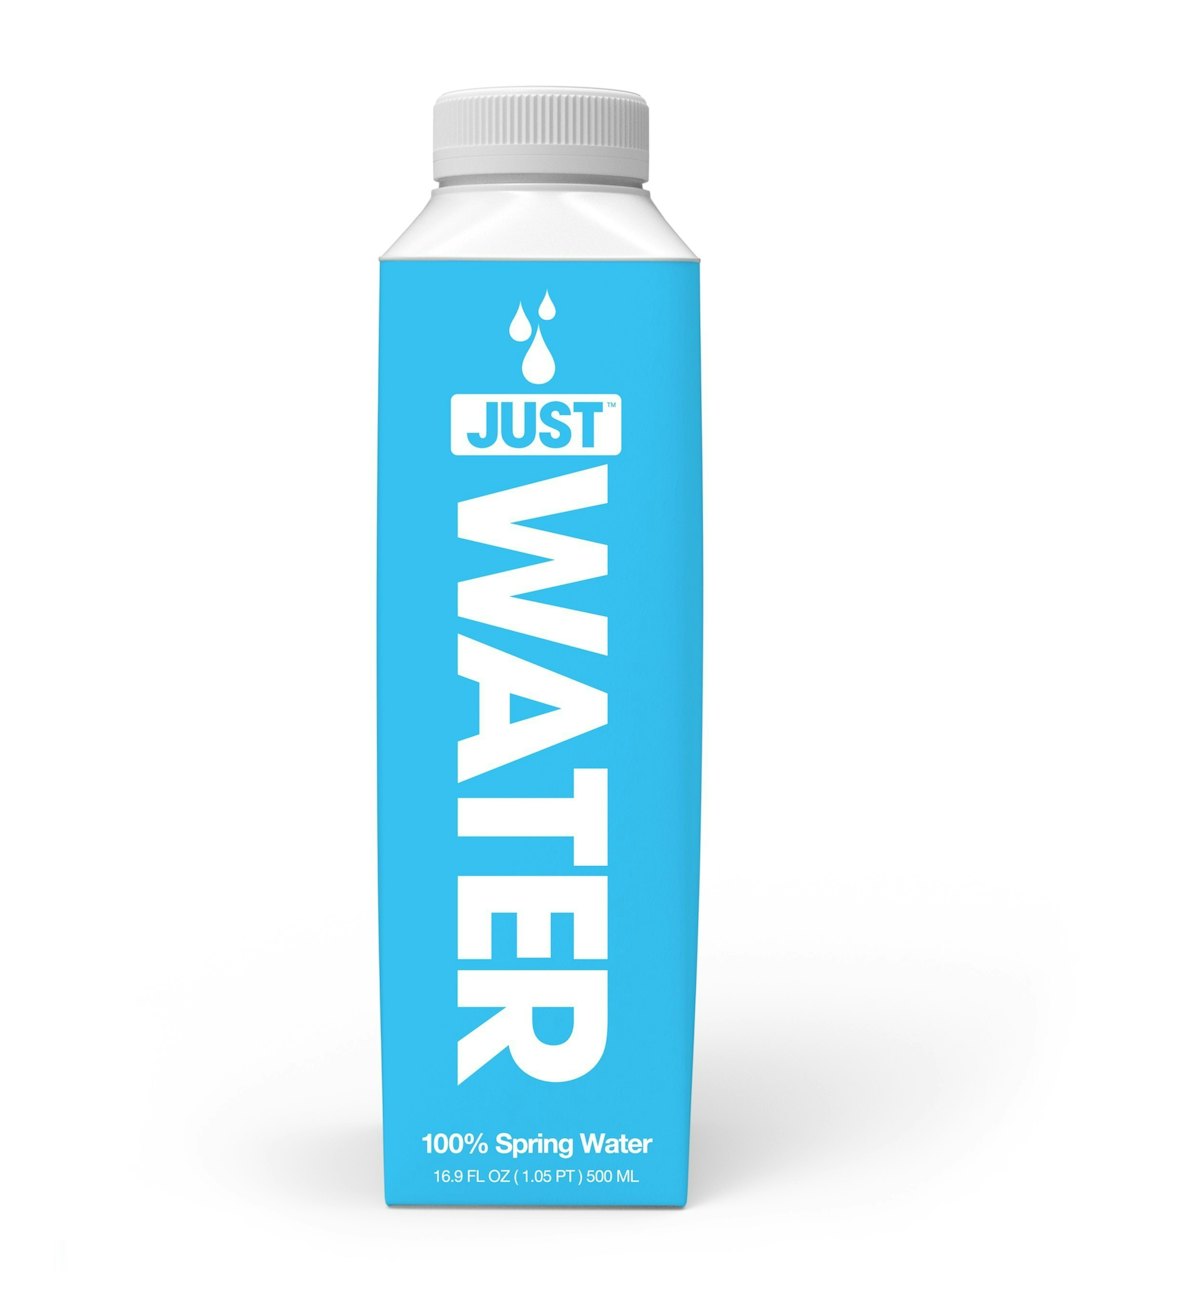 JUST Water's 100% Recyclable Carton